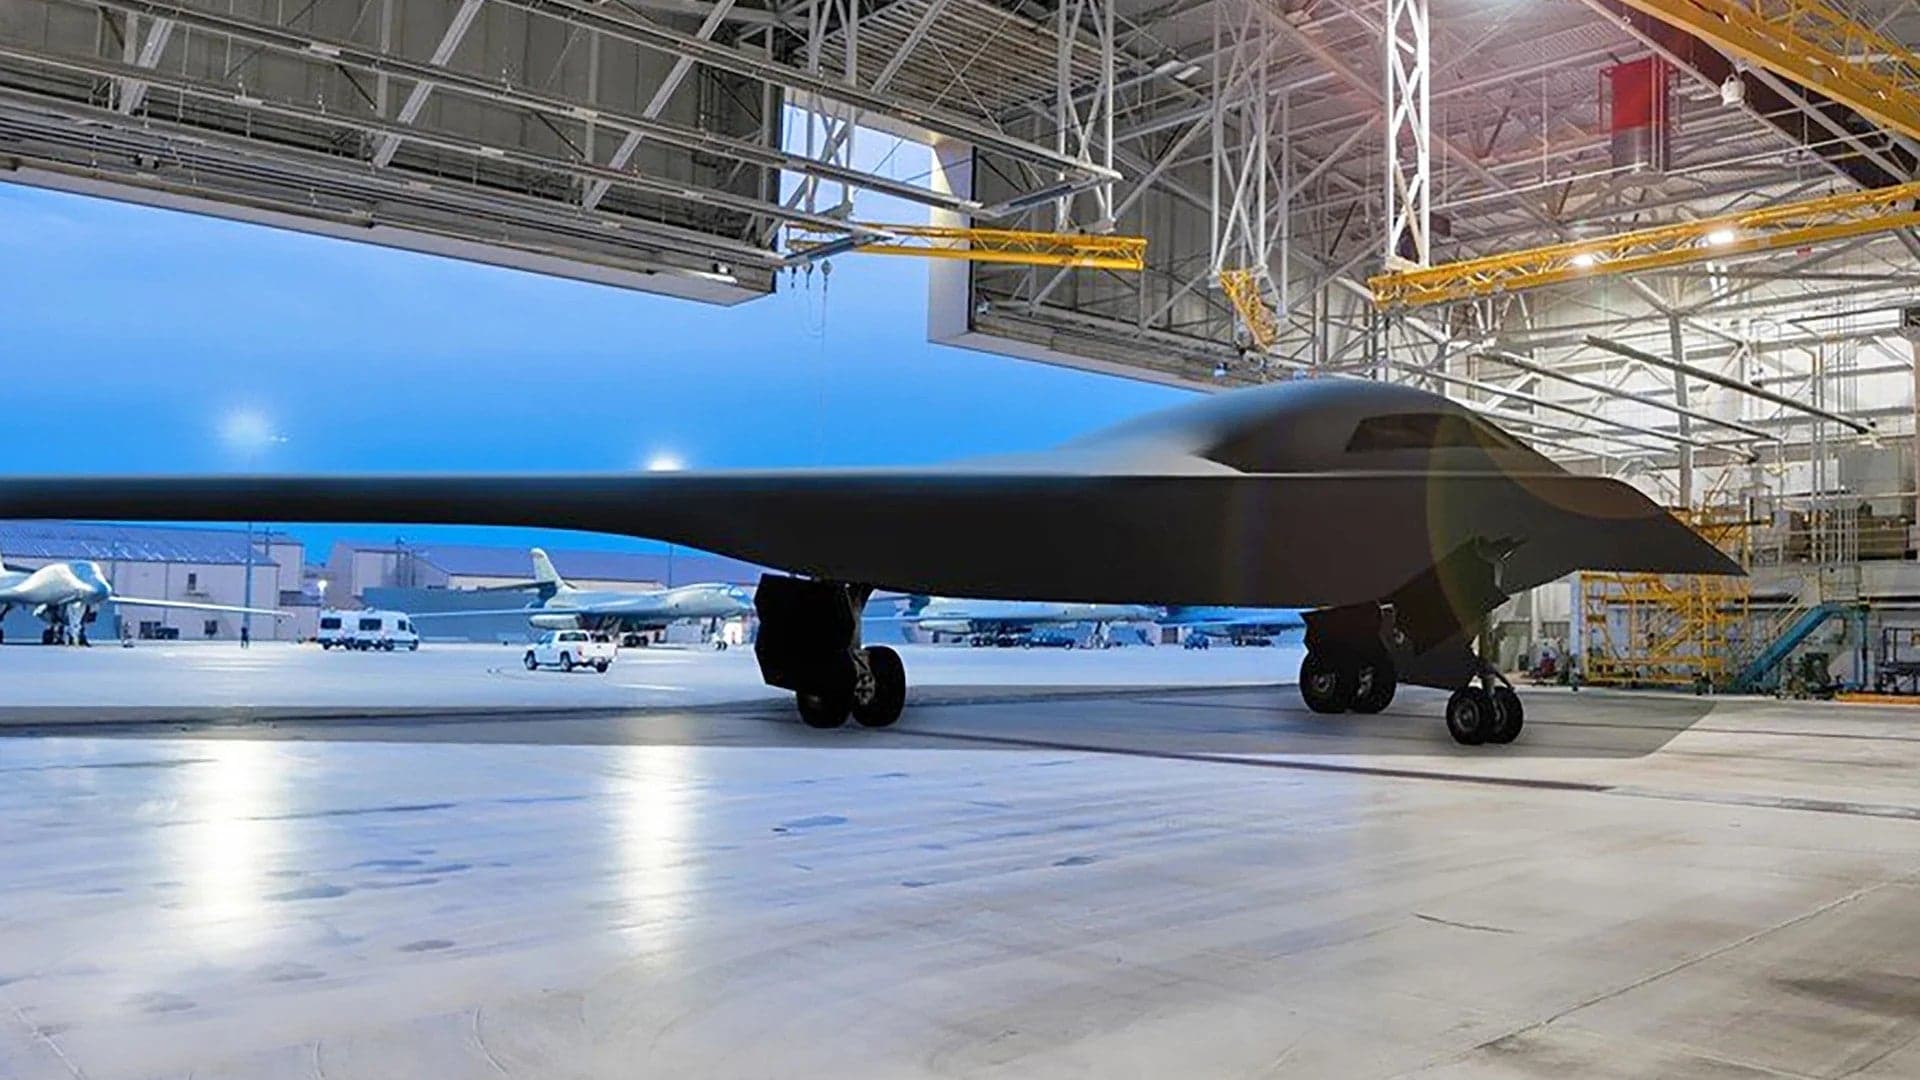 B-21 Raider Stealth Bomber Is “Starting To Look Like An Airplane”